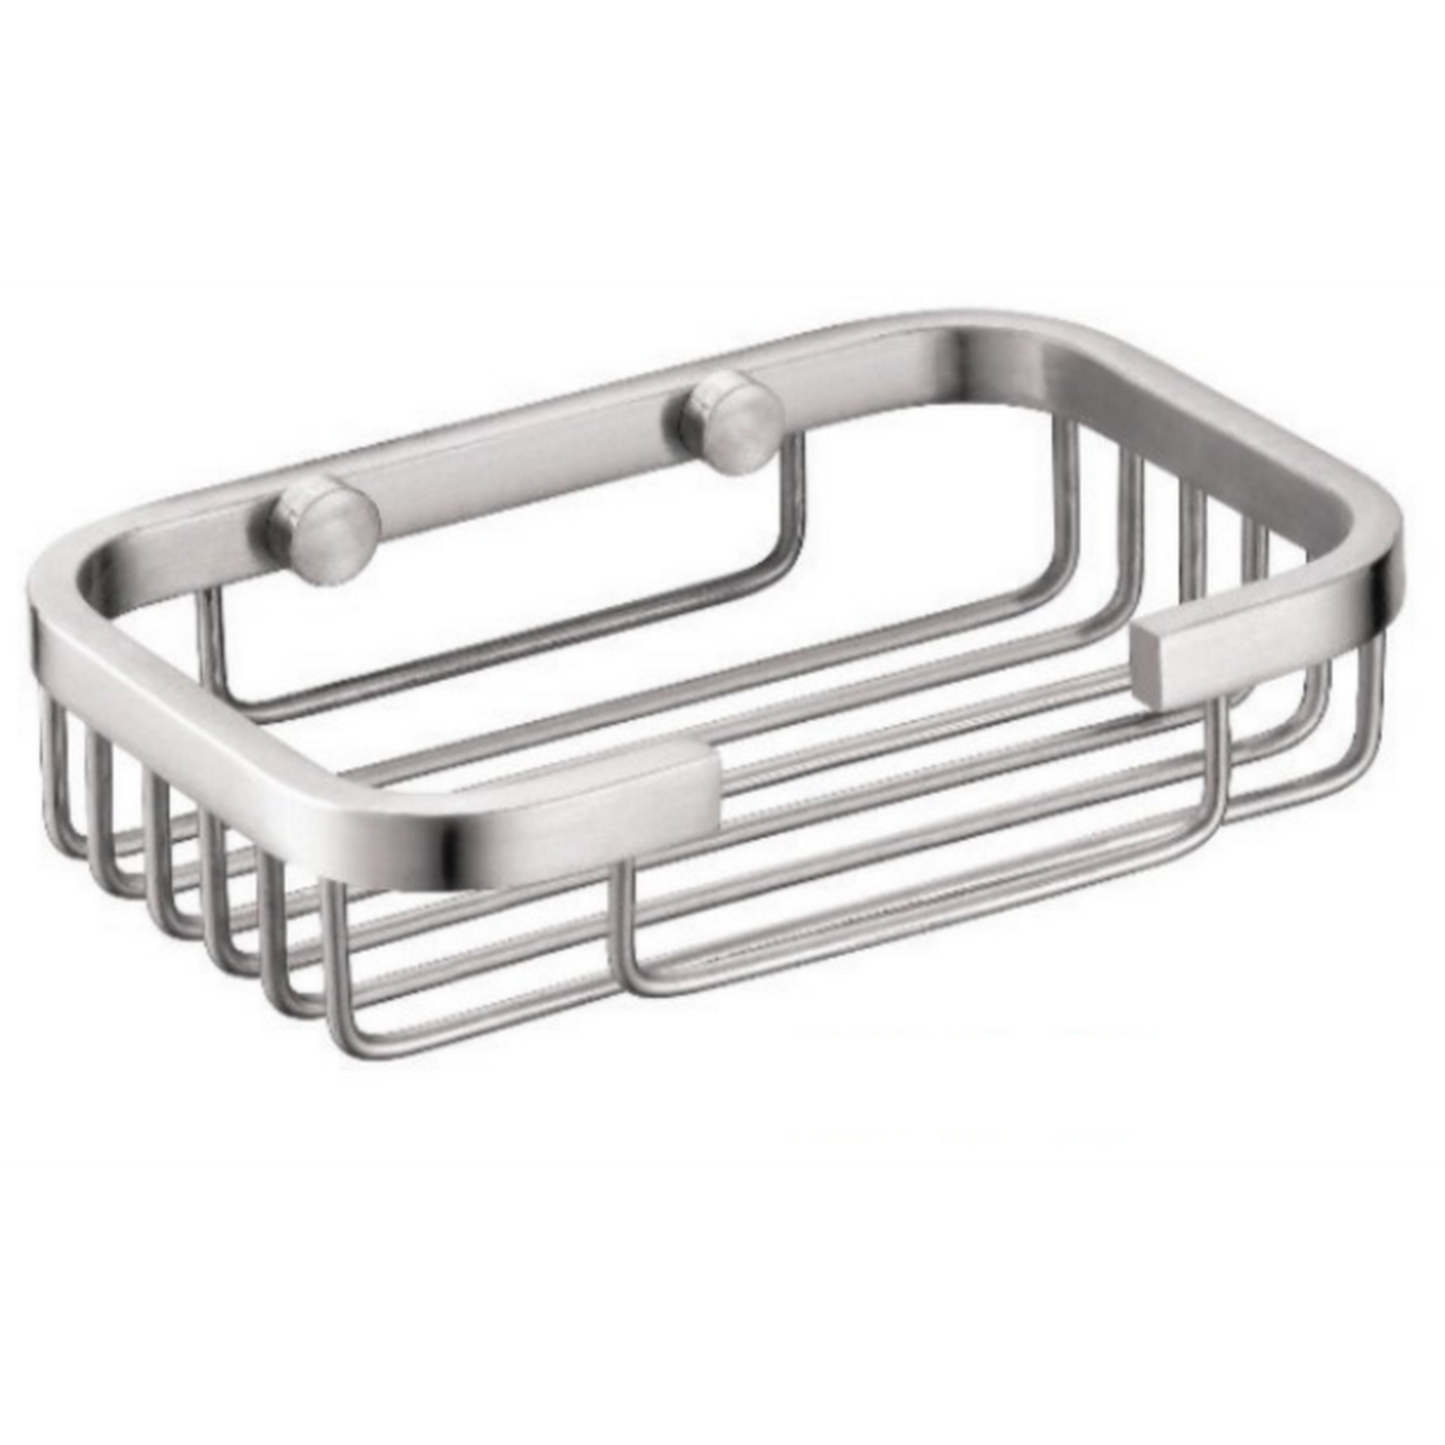 Seachrome Conorado Series 4" Polished Stainless Steel Shower Wire Soap Basket